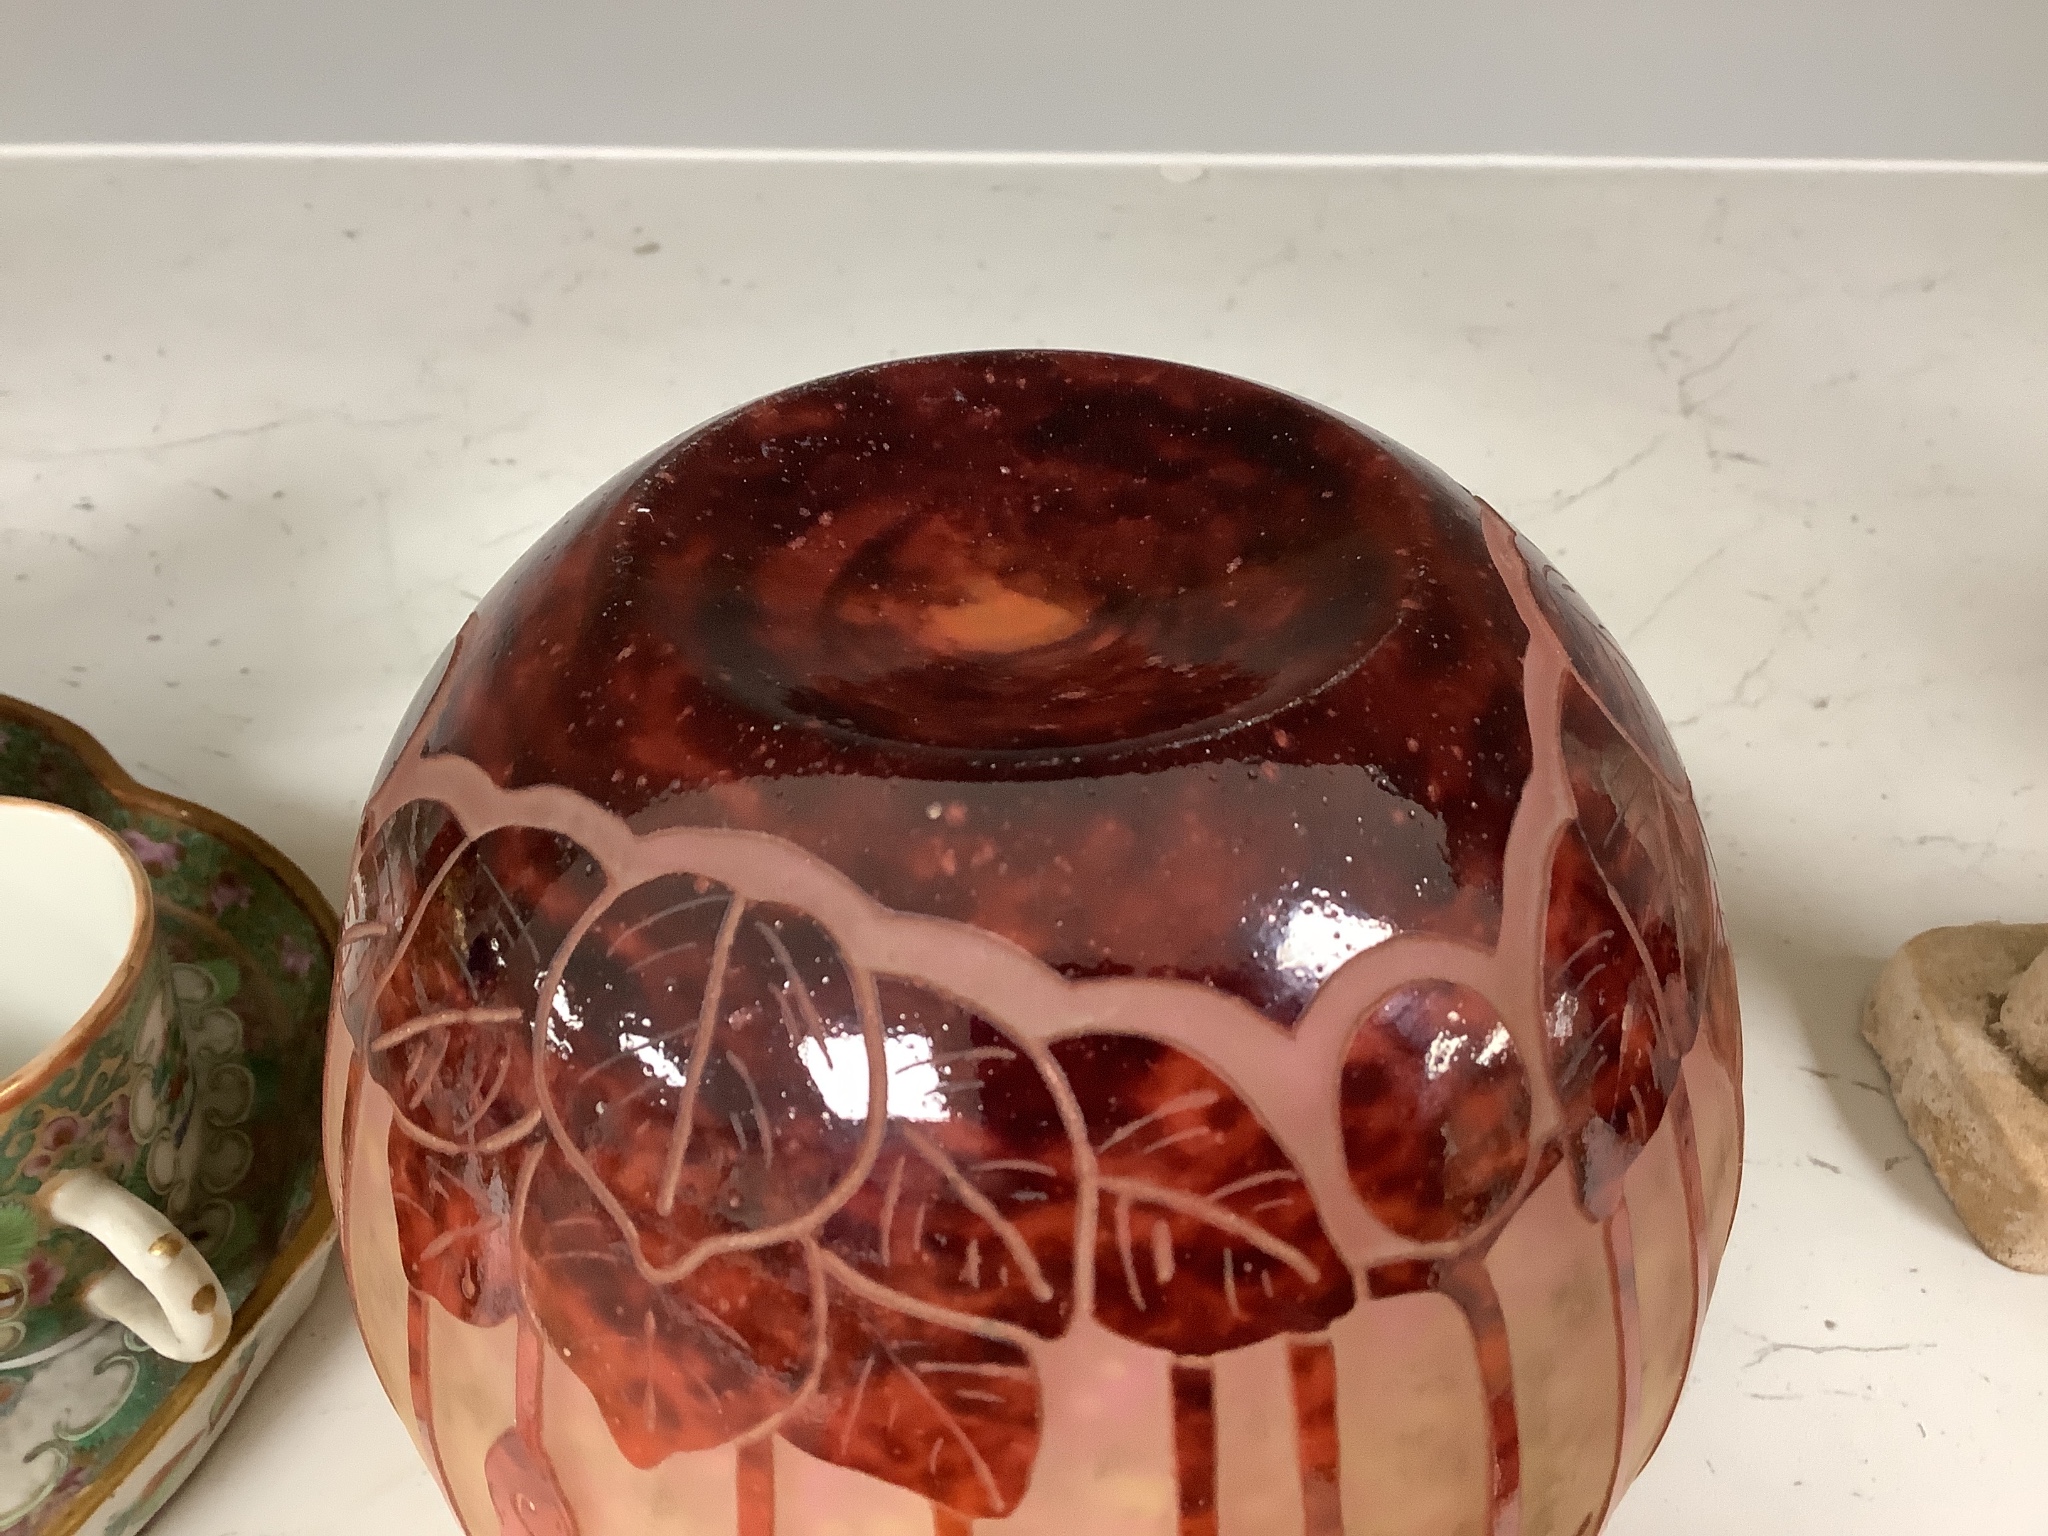 A Charder cameo glass vase